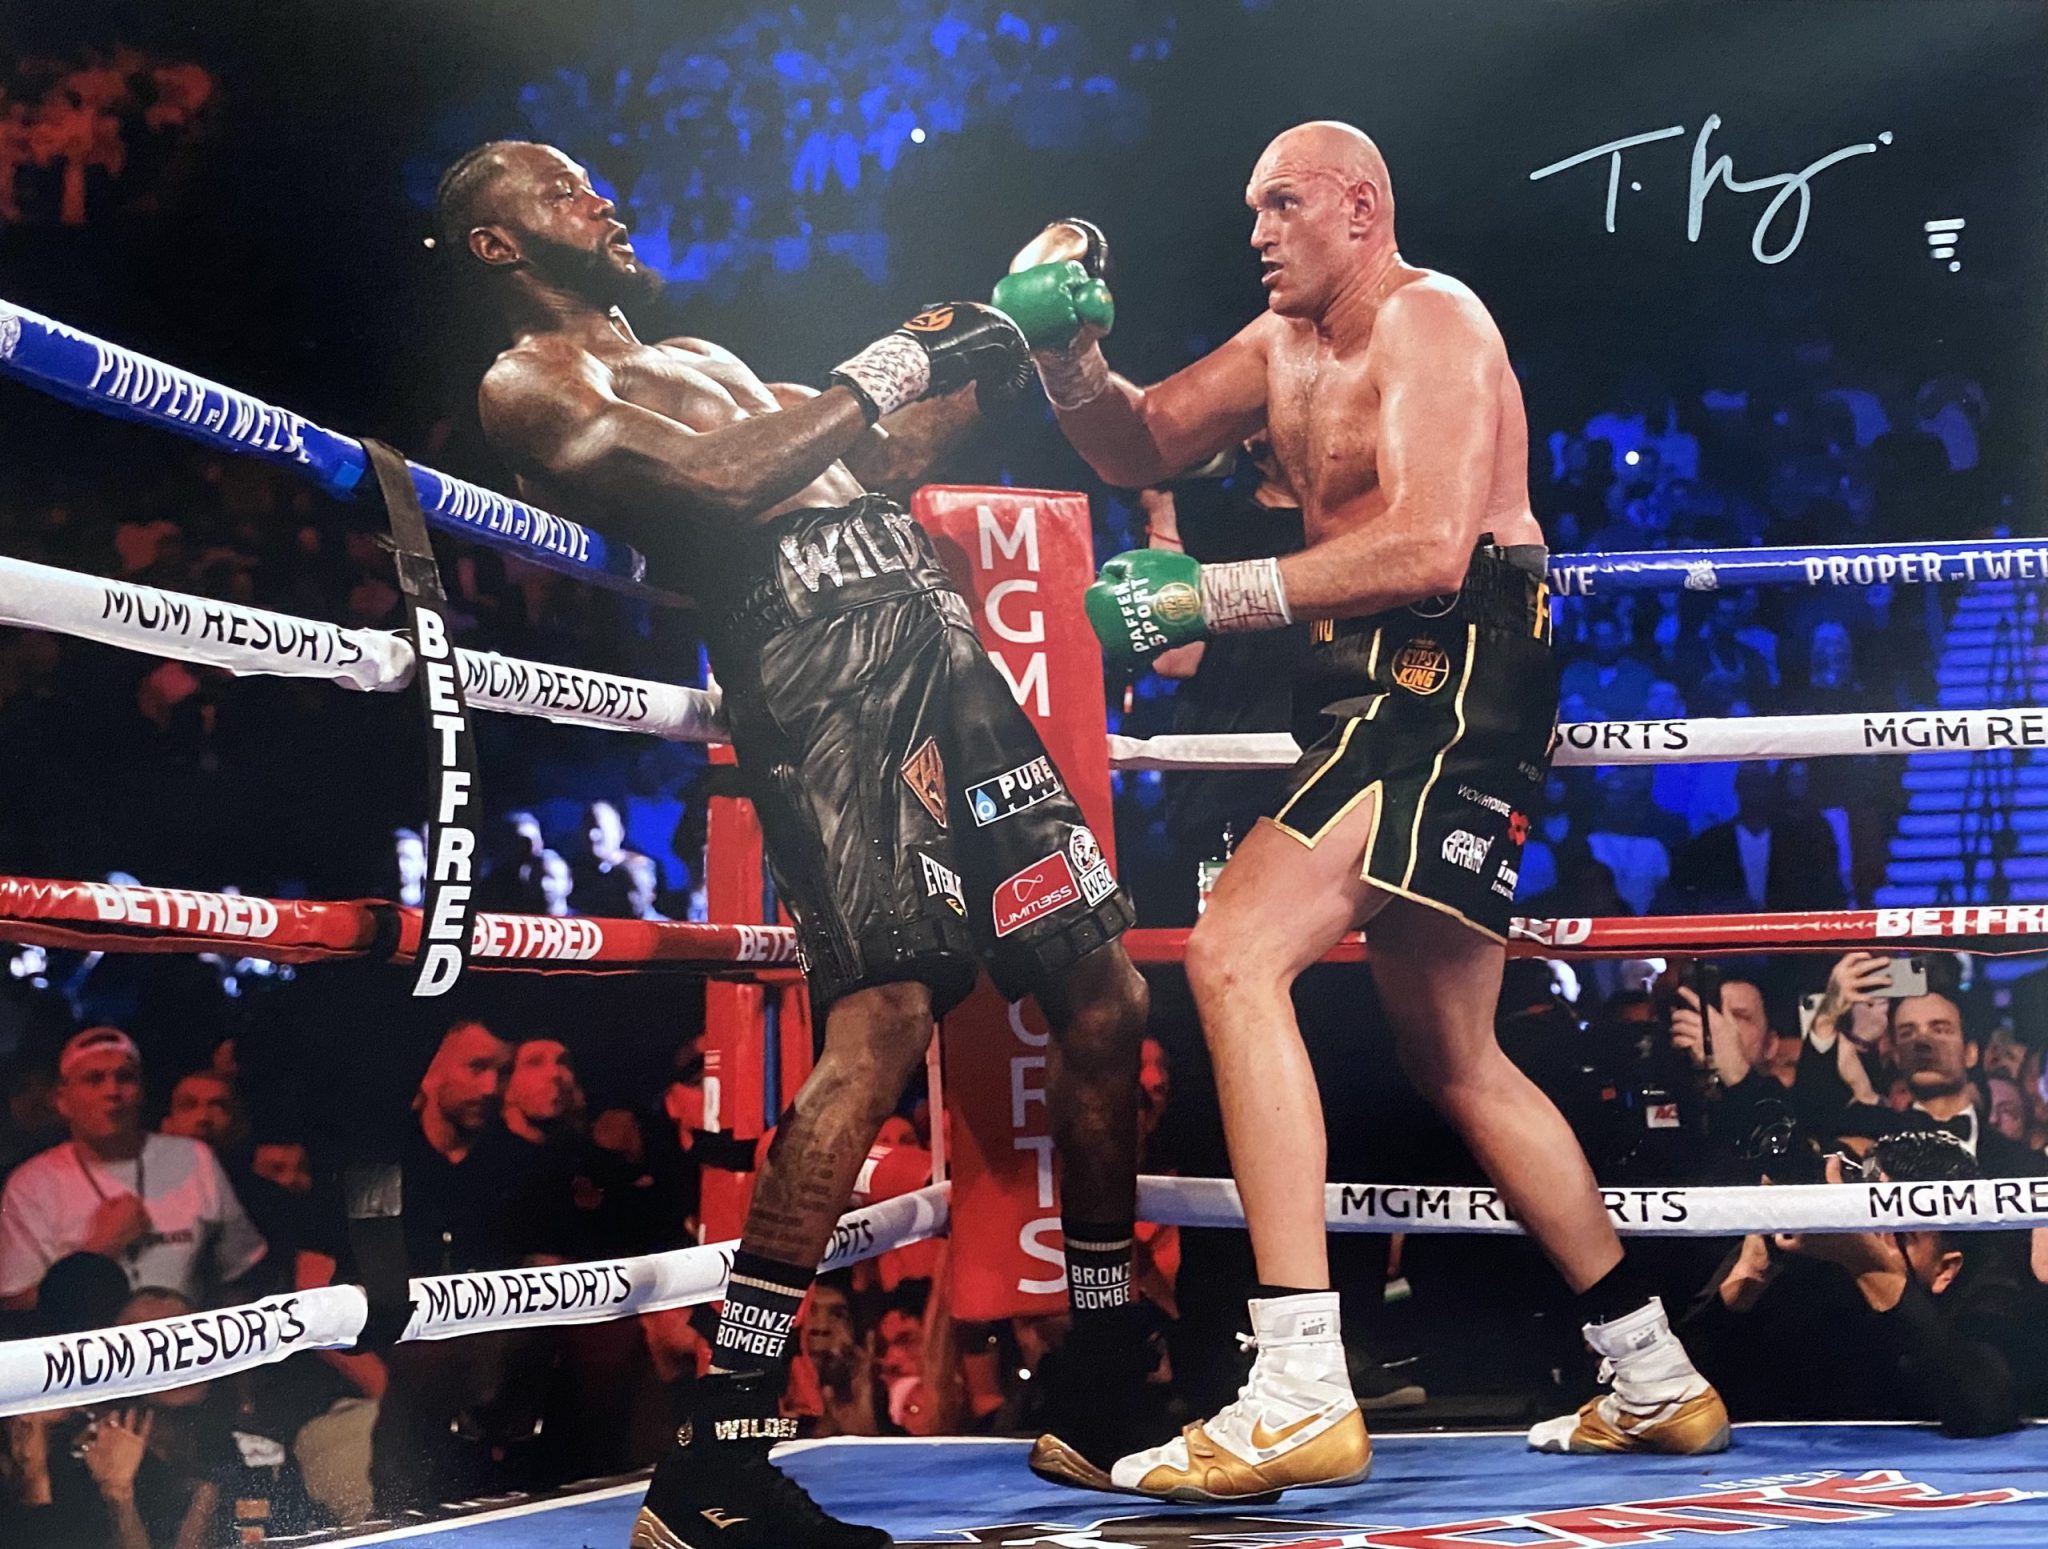 SIGNED 16X12 PHOTO - Tyson Fury Official Merchandise